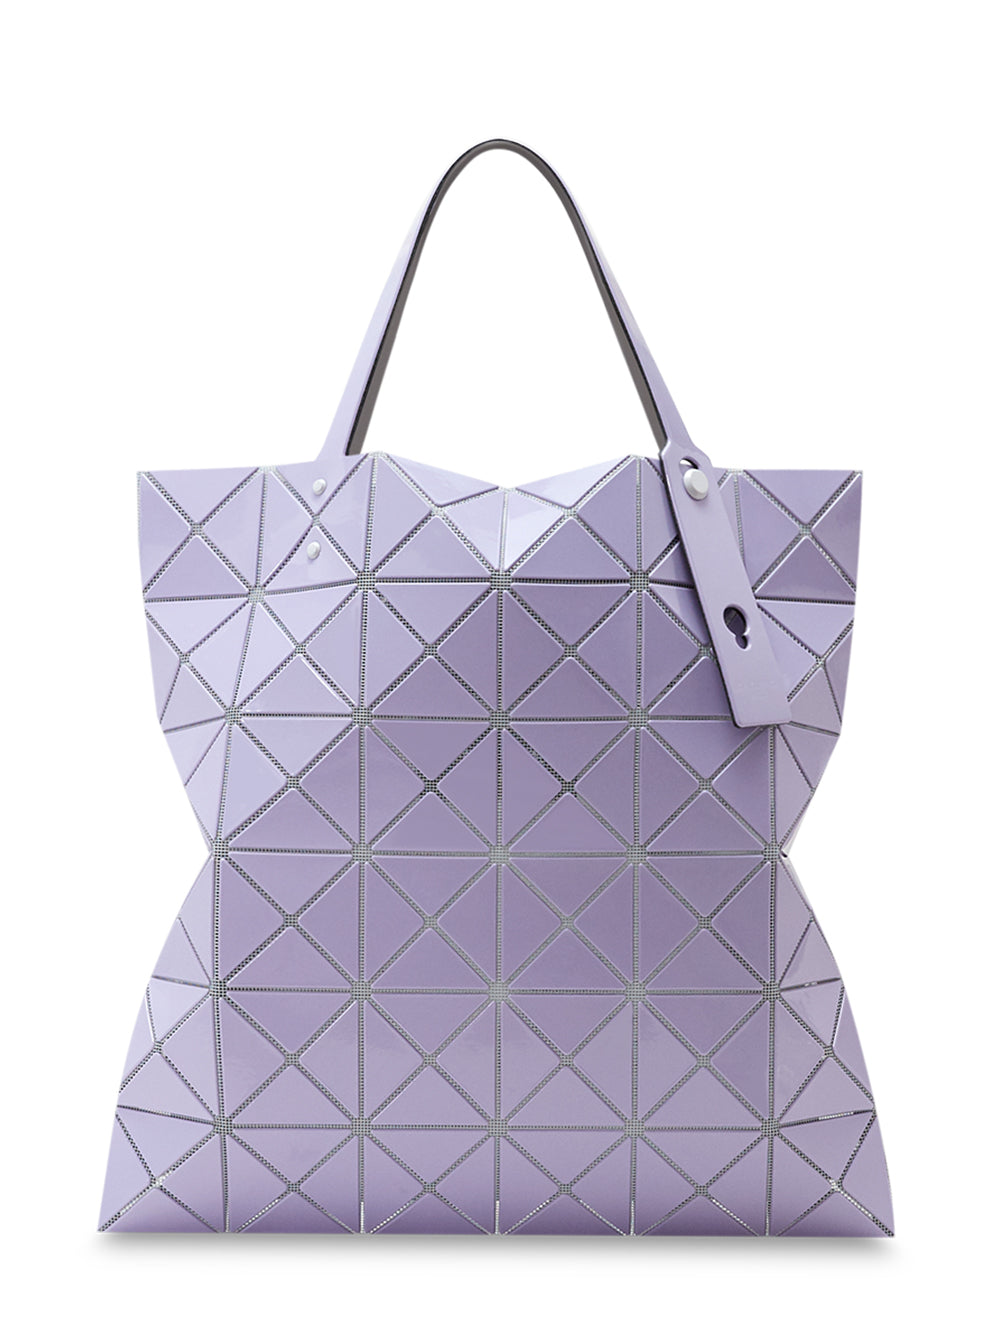 LUCENT GLOSS Tote (6*6) (Lavender)